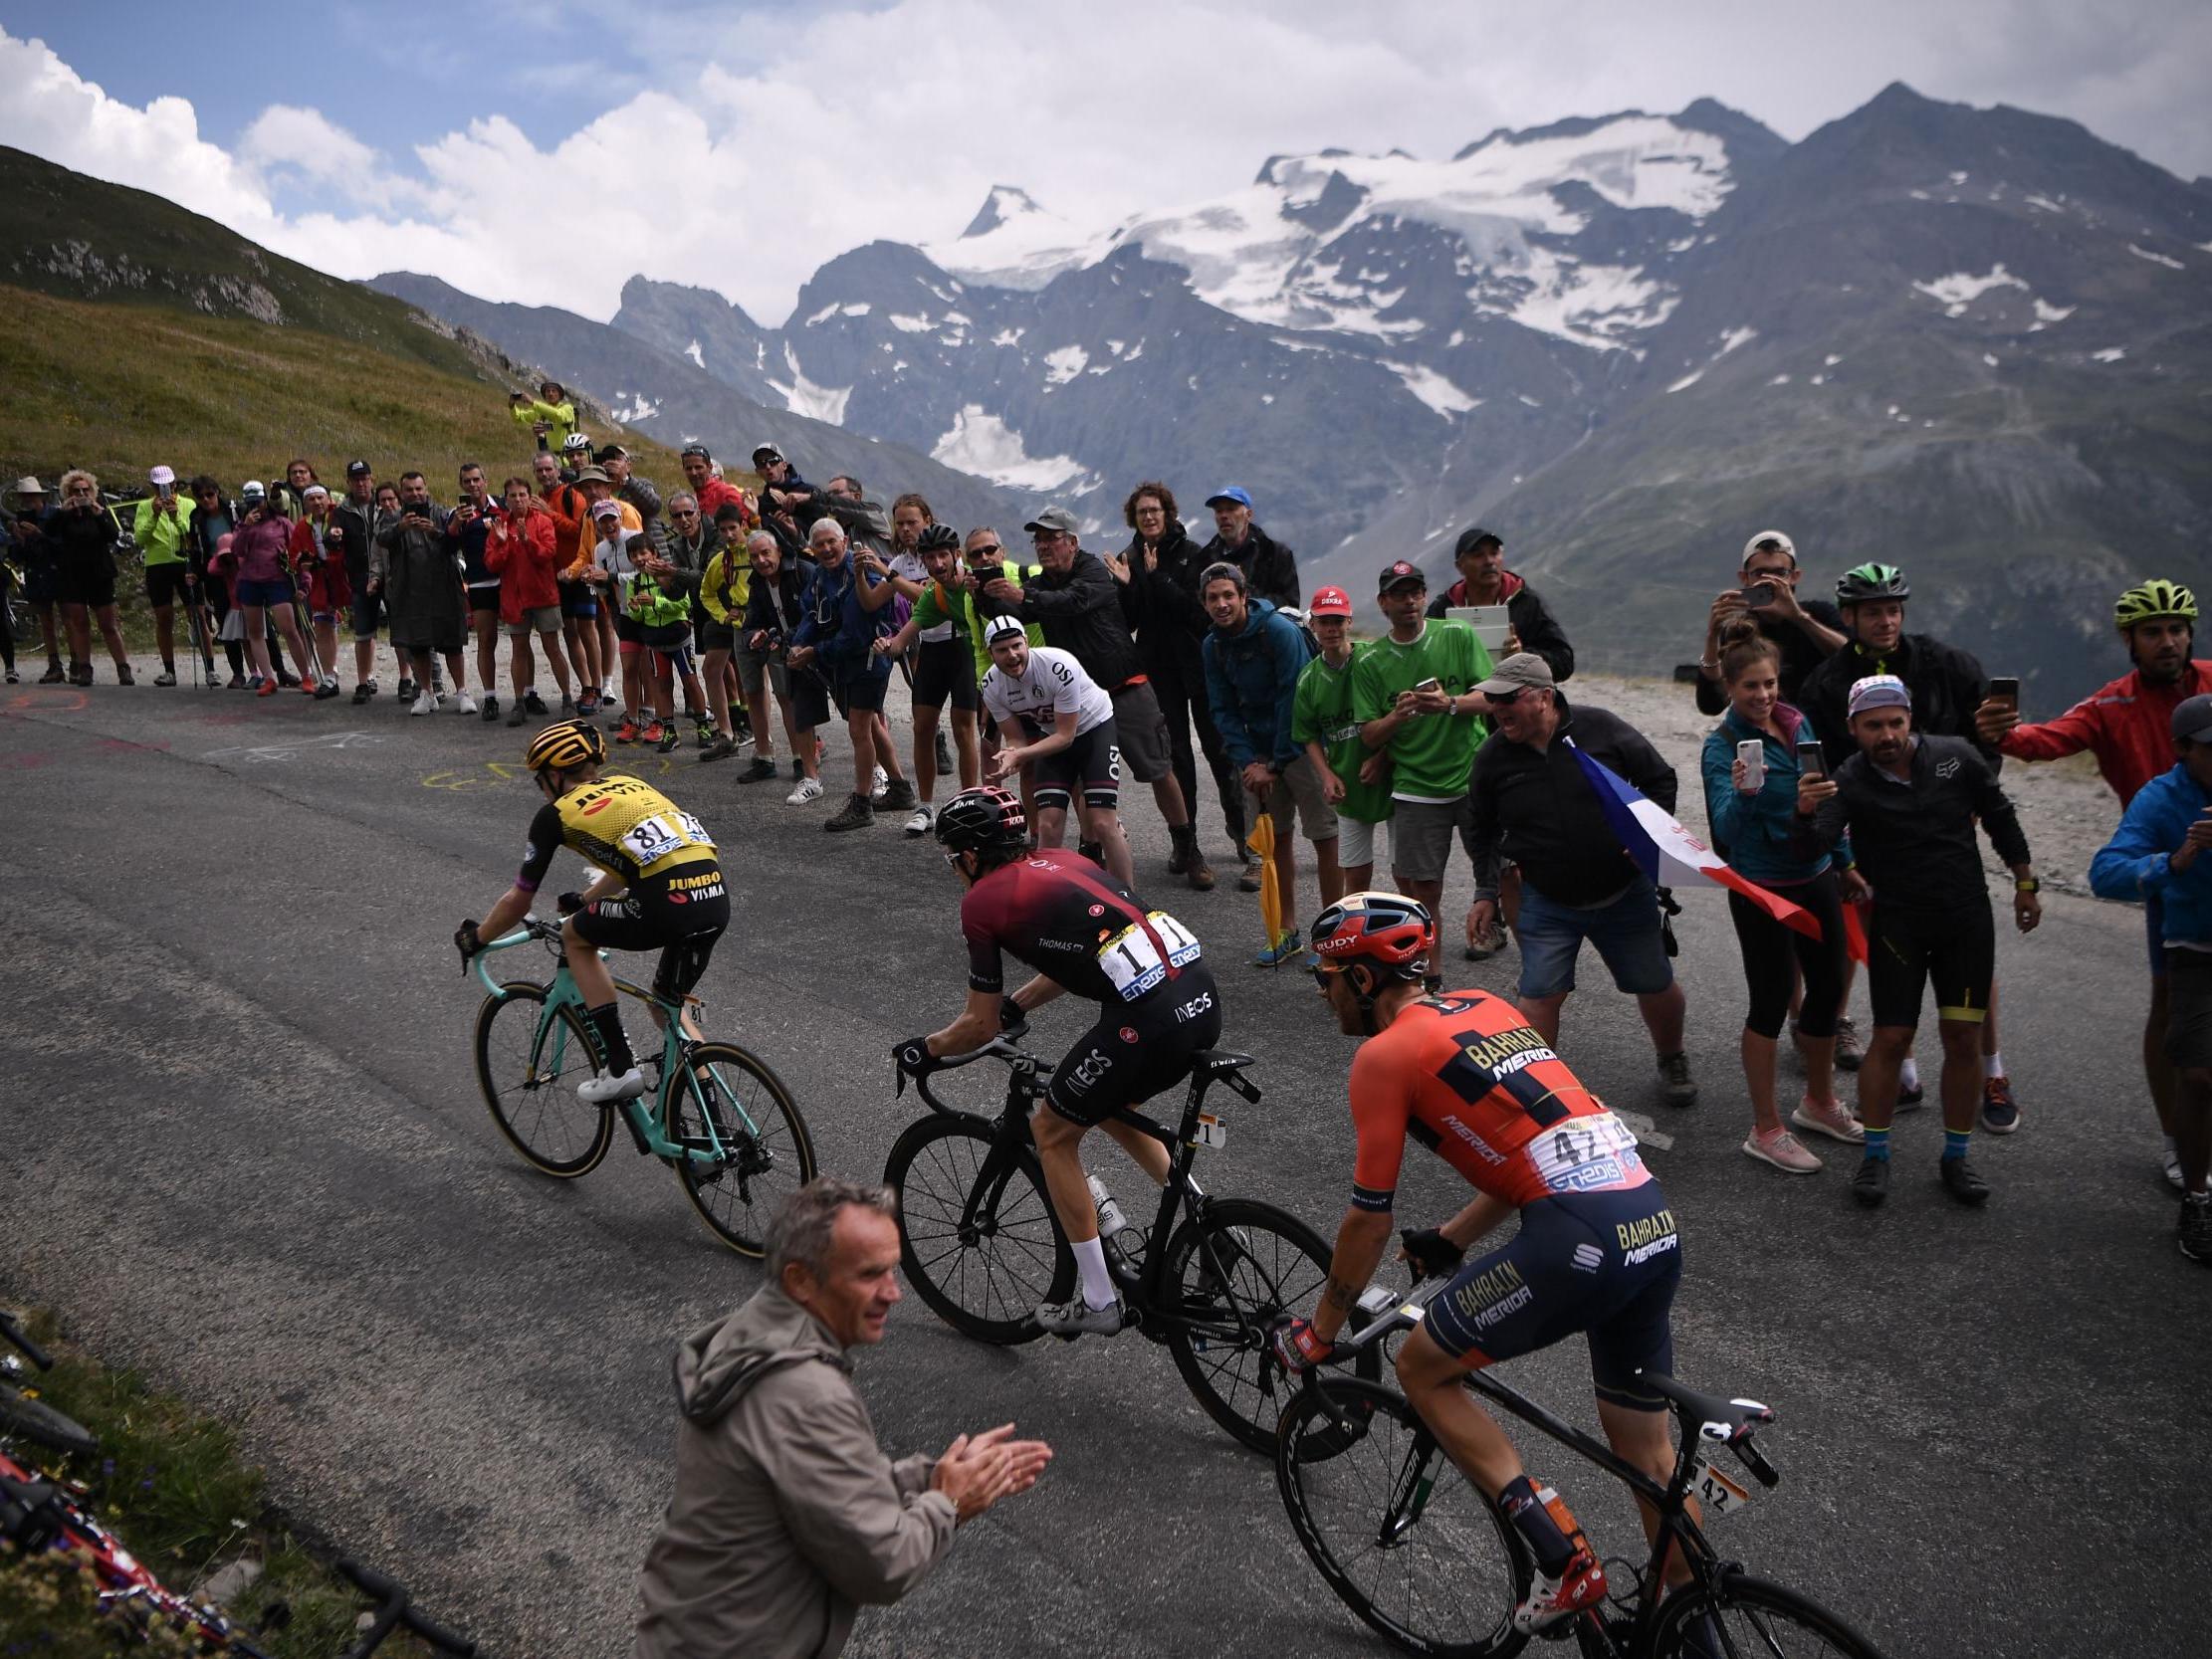 The Tour de France will not see as many fans this year